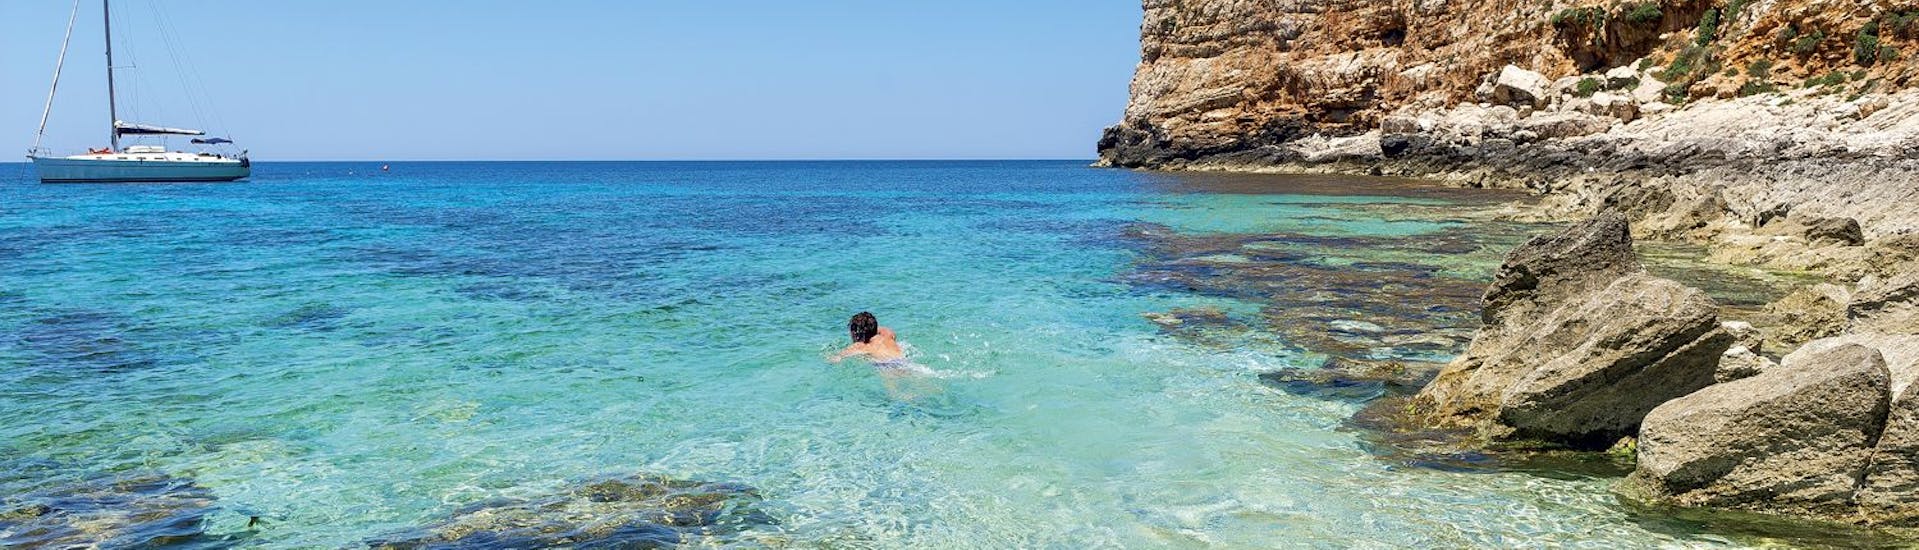 Private Sailing Boat Trip to Favignana and Levanzo from Trapani with Snorkeling.